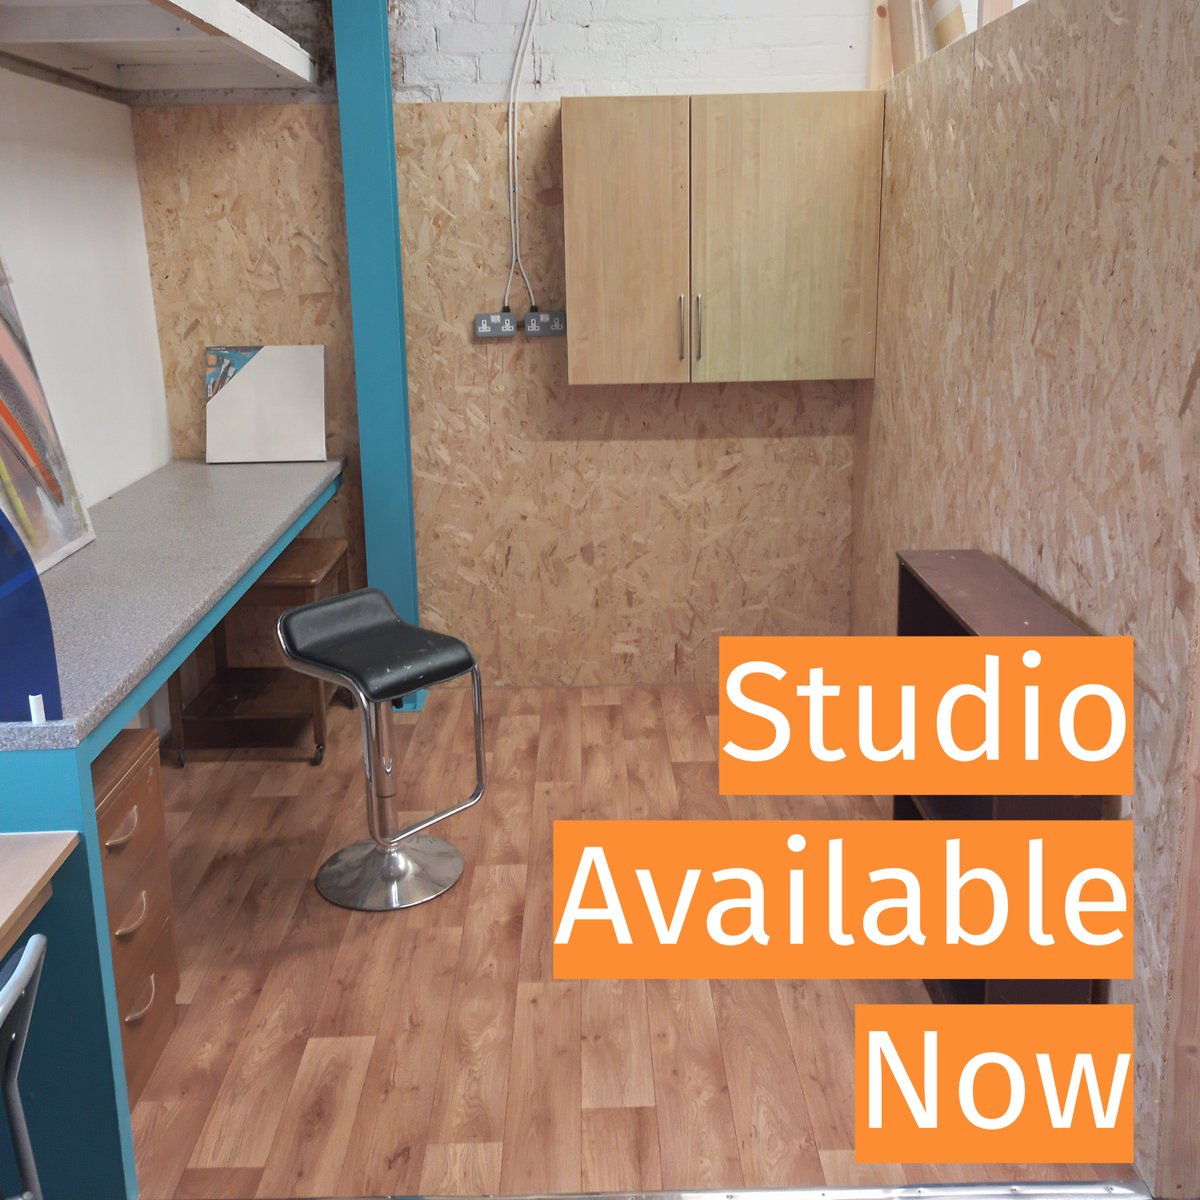 Creative Studios To Rent!⁠ - Available now!⁠ ⁠ Visit aireplacestudios.com for tour.